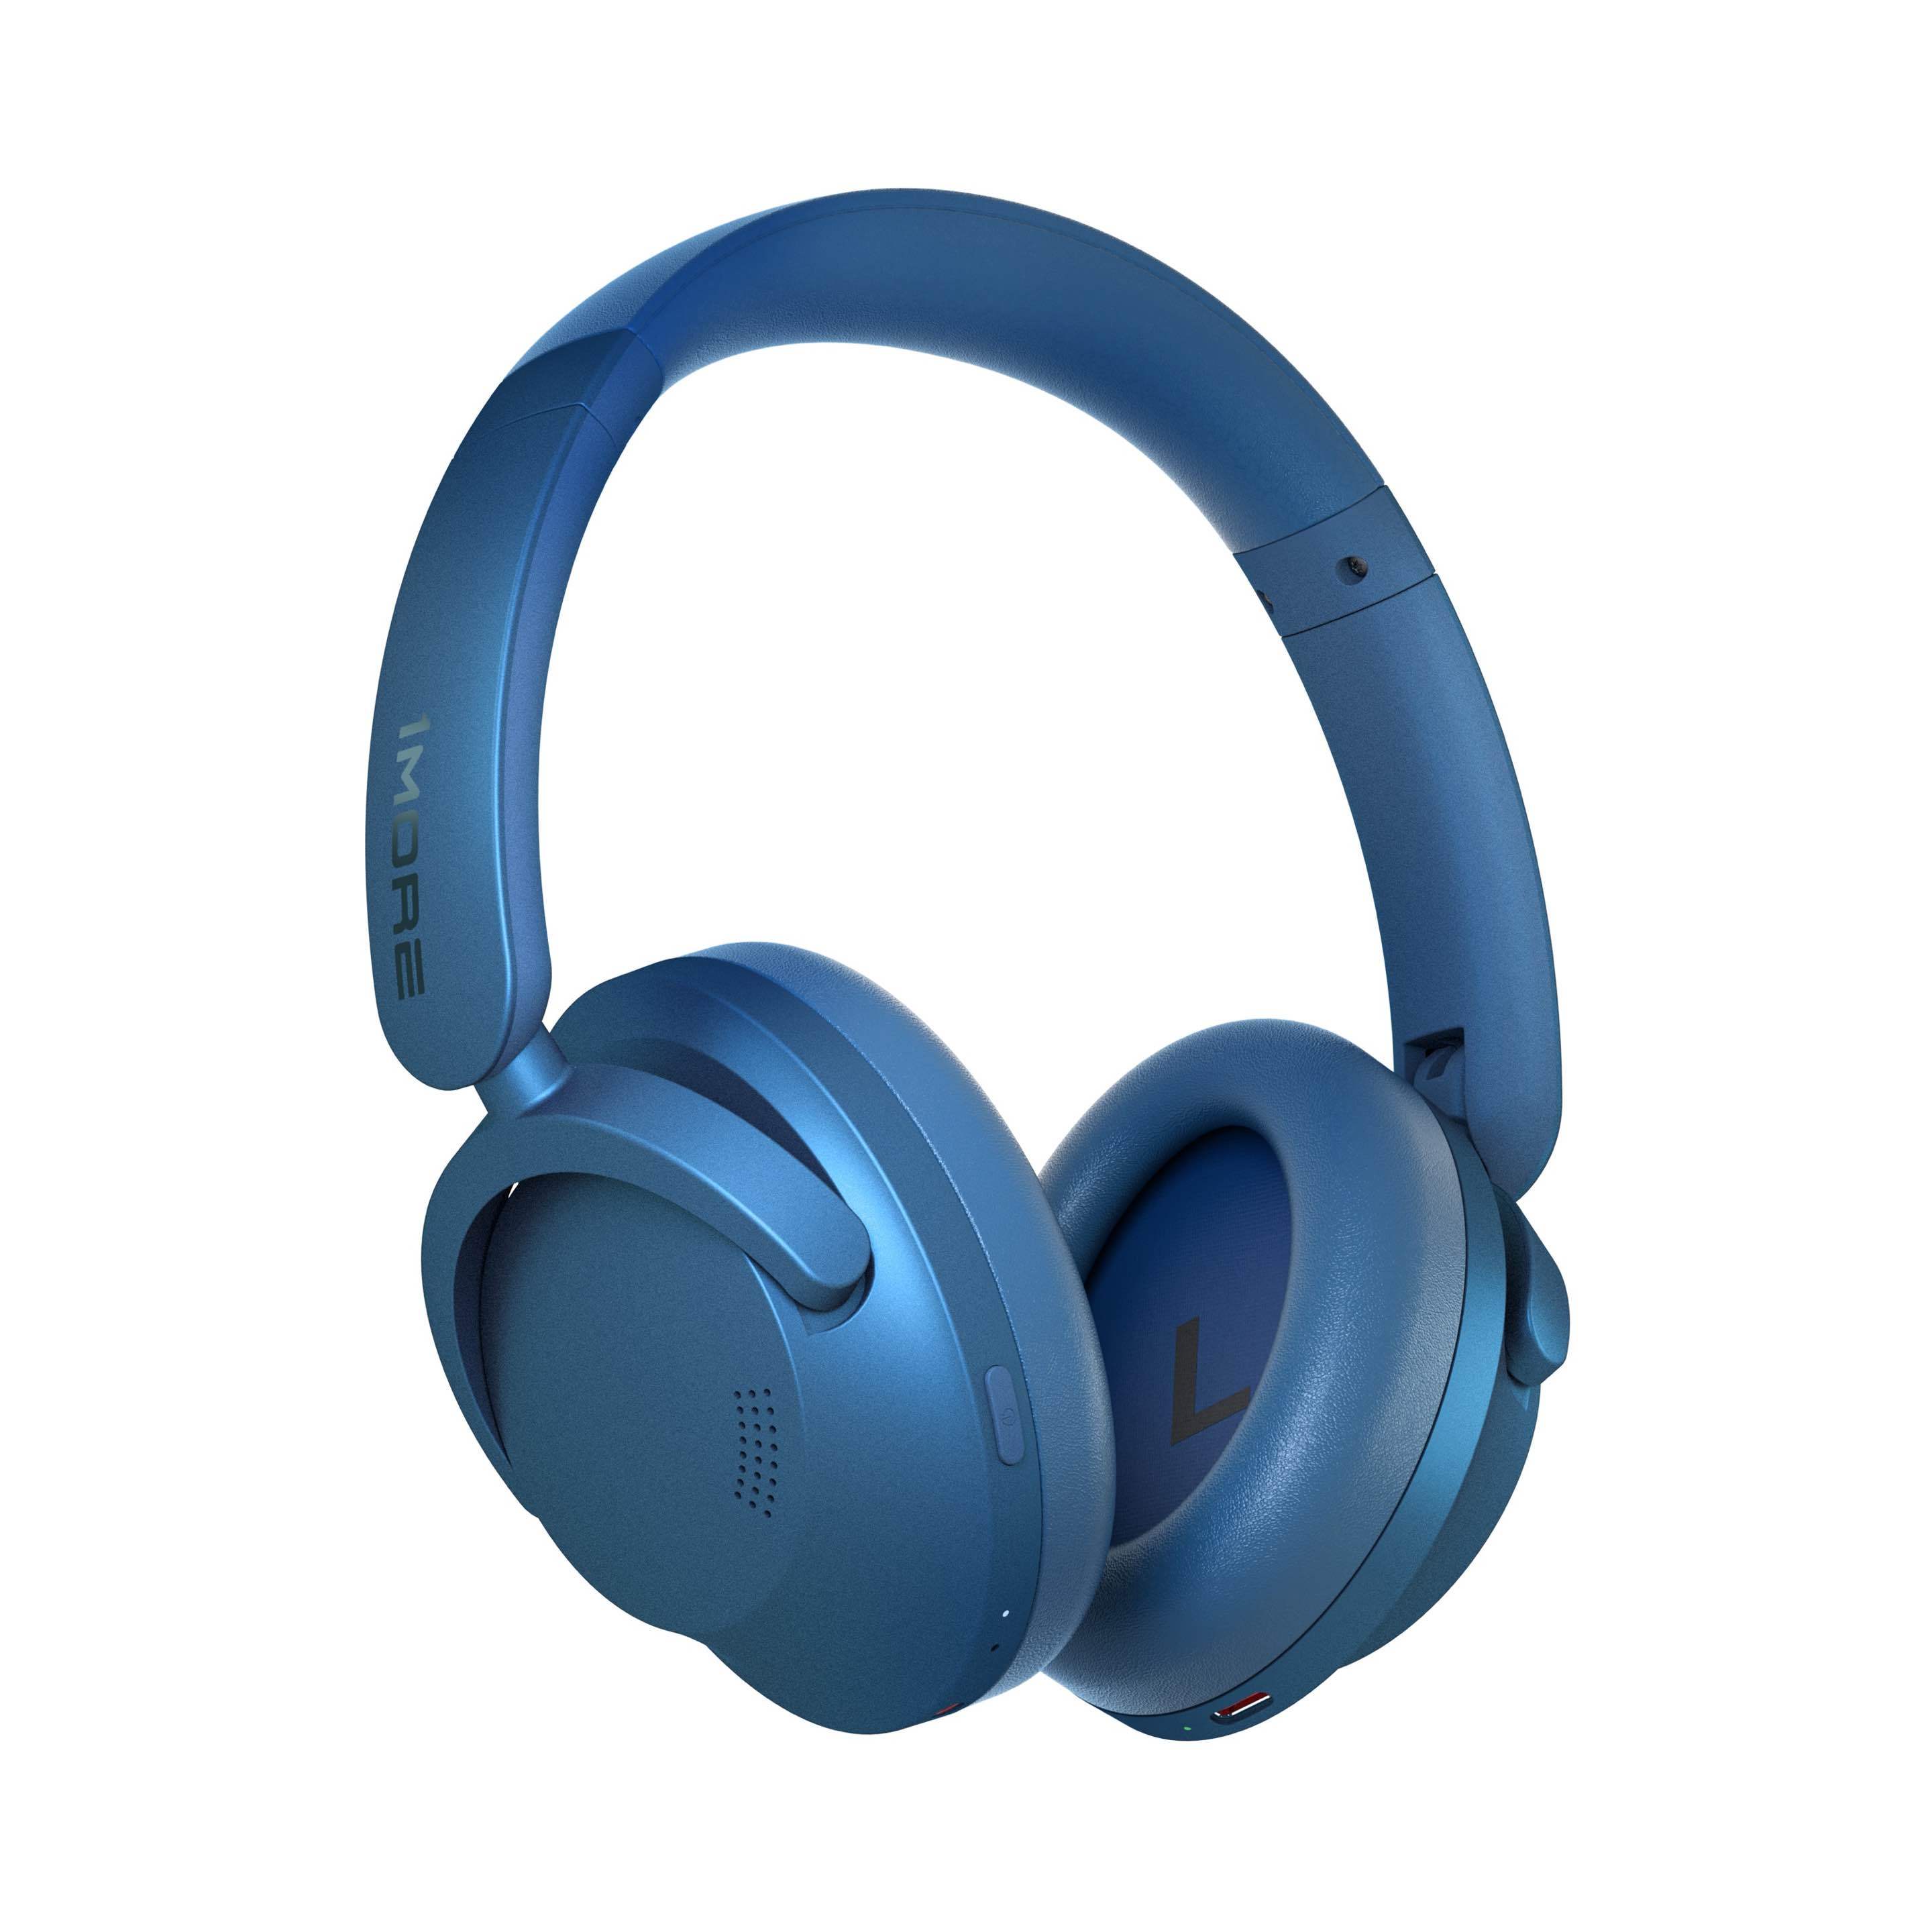 1MORE SonoFlow Bluetooth Wireless Headphones, Hi-Res LDAC AAC, ANC 12 Music  EQ, 70H Battery, Connect 2 Devices